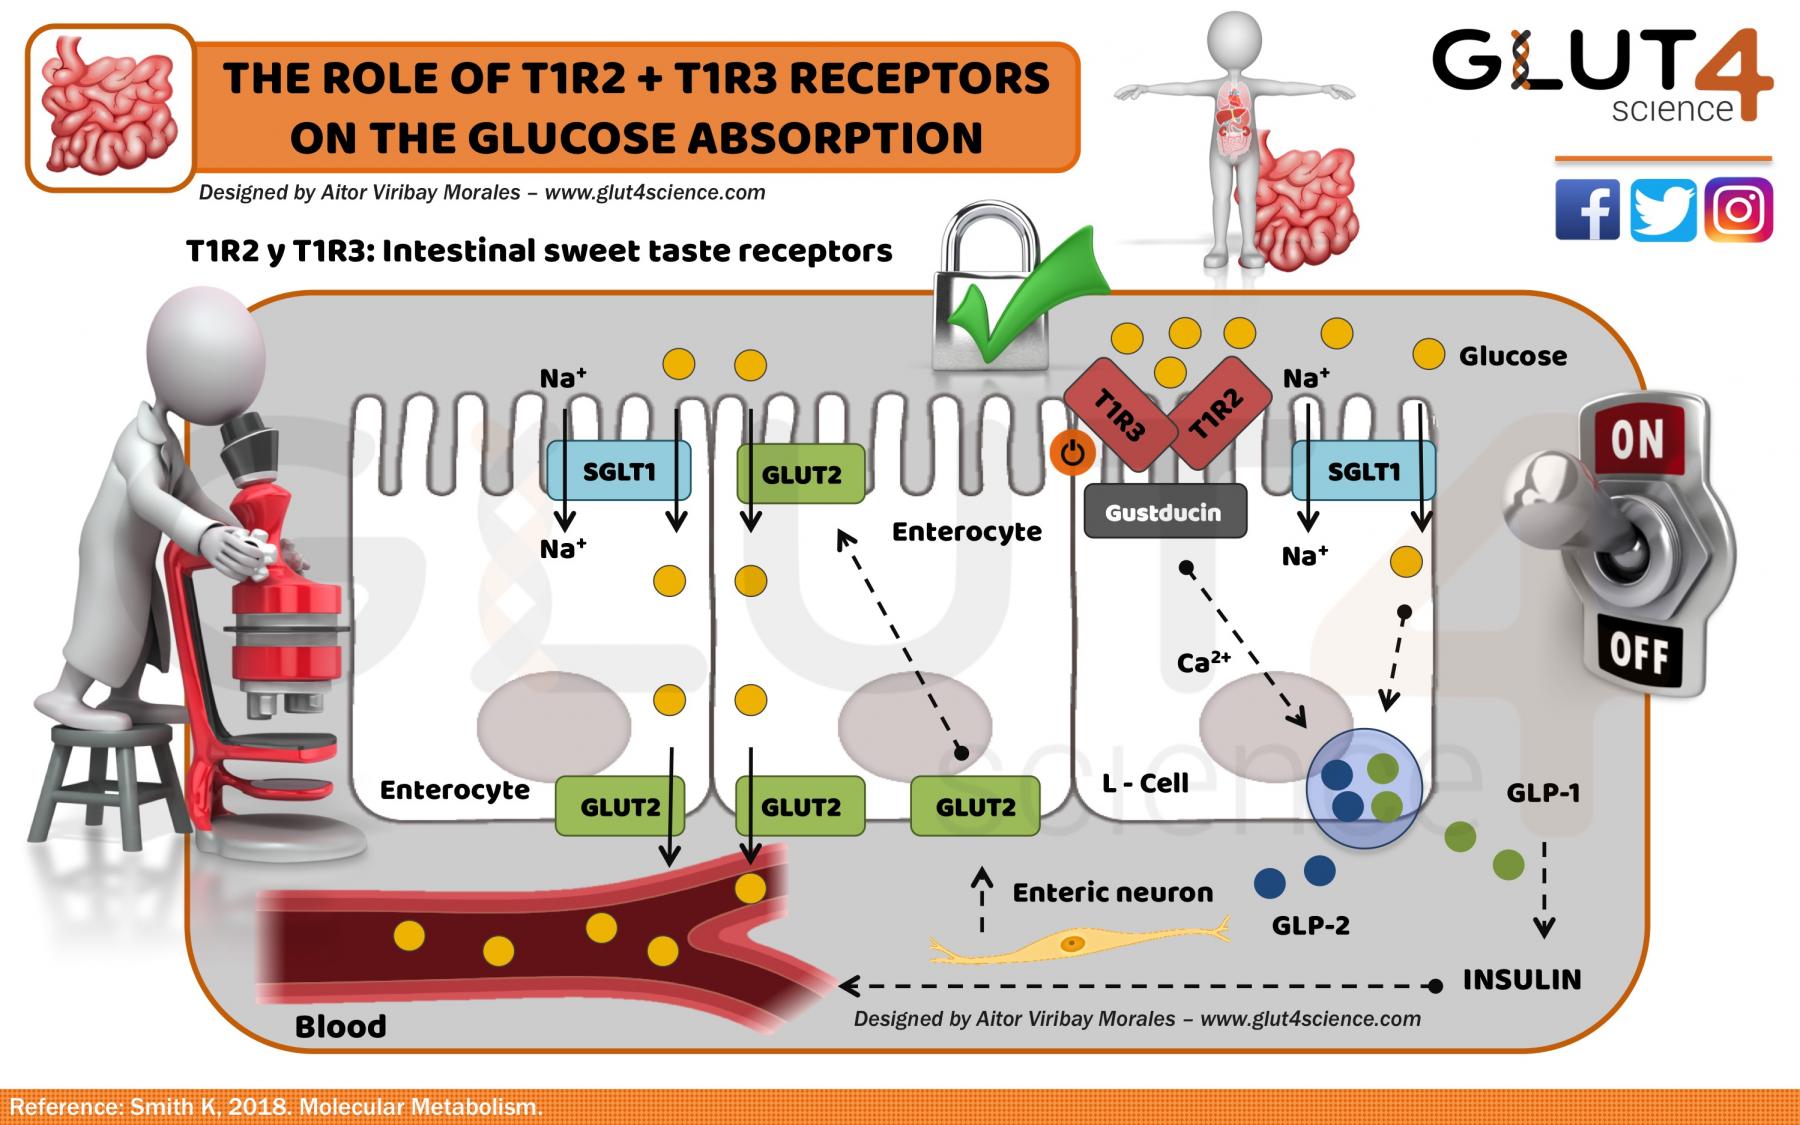 The role of T1R2 and T1R3 receptors on glucose absorption